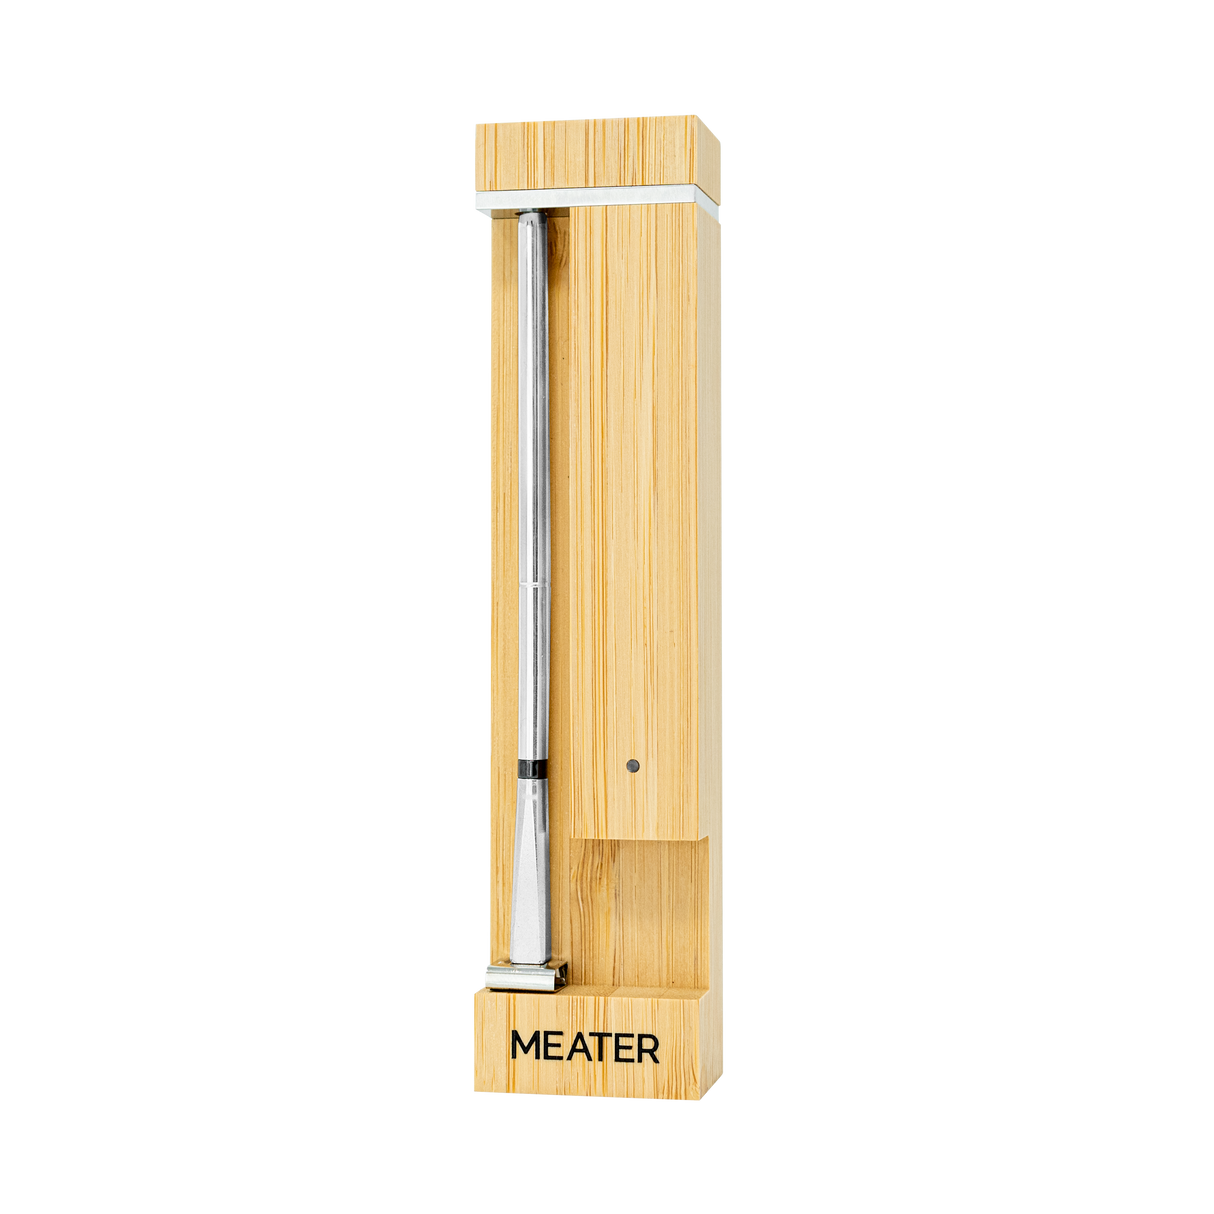 The All-New MEATER 2 Plus